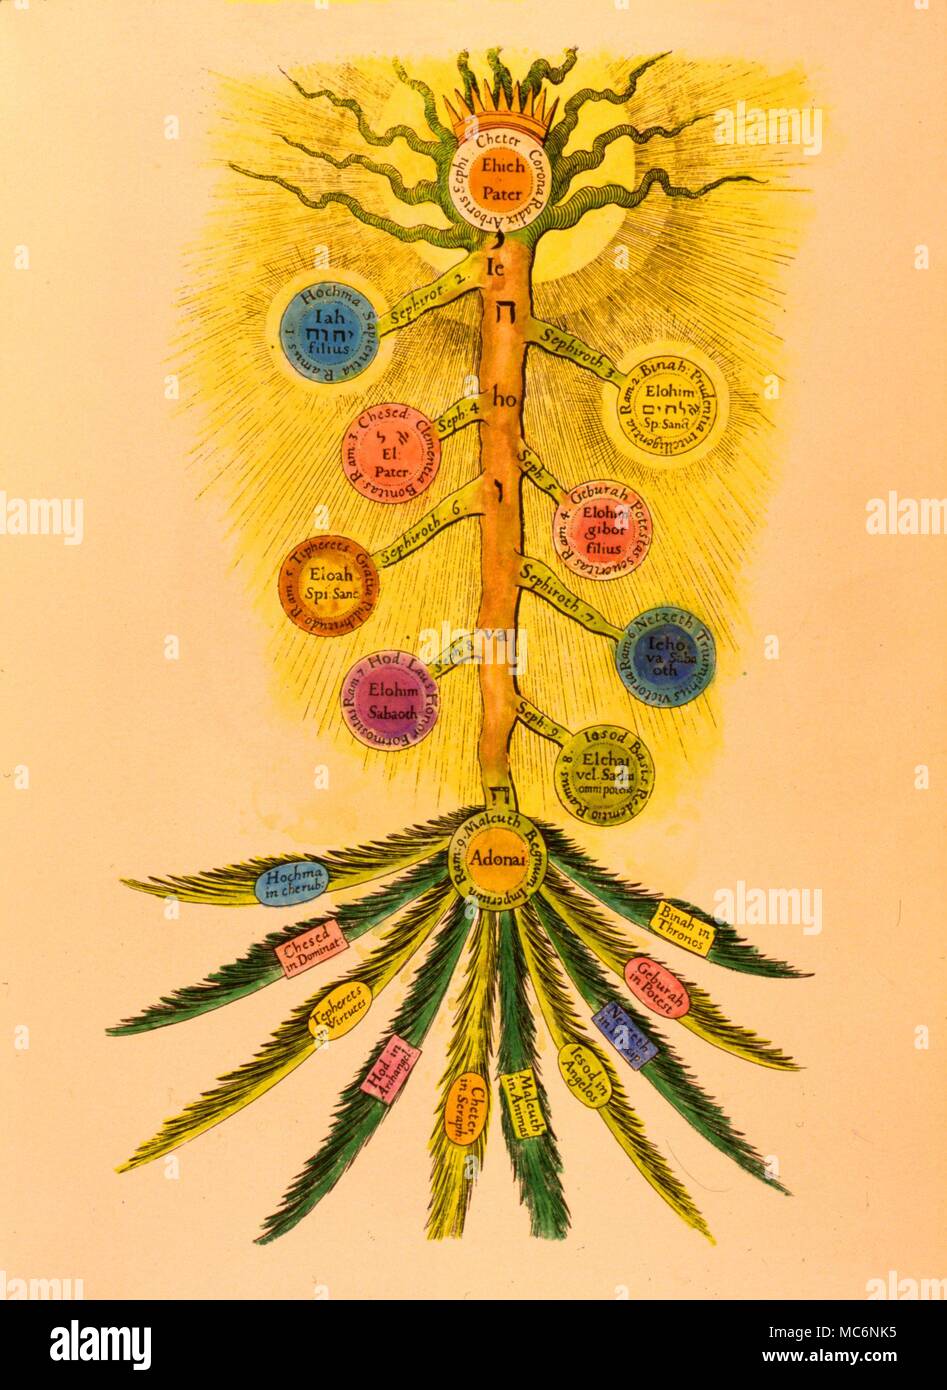 Cabbalistic Sephirothic Tree of Life, with the names in Latin and Hebrew. This image is from the Christian Cabala of Robert Fludd, 'Cosmi Utrisque ...Historia' [1619]. Stock Photo